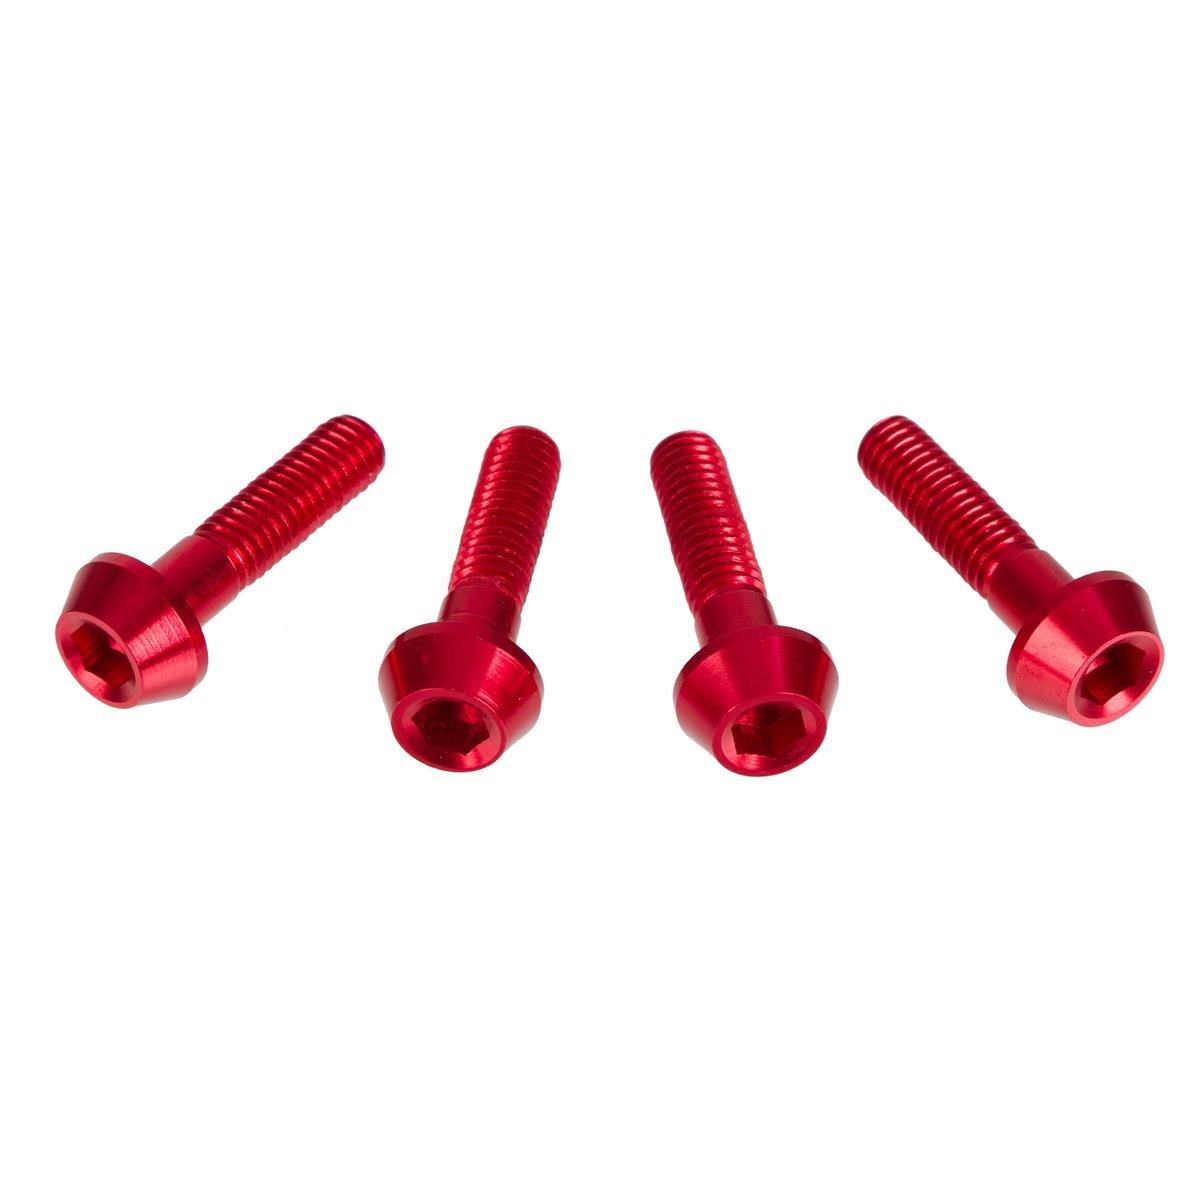 DRC Inner Hex Bolts  M6 x 25 mm, Red, Pack of 4